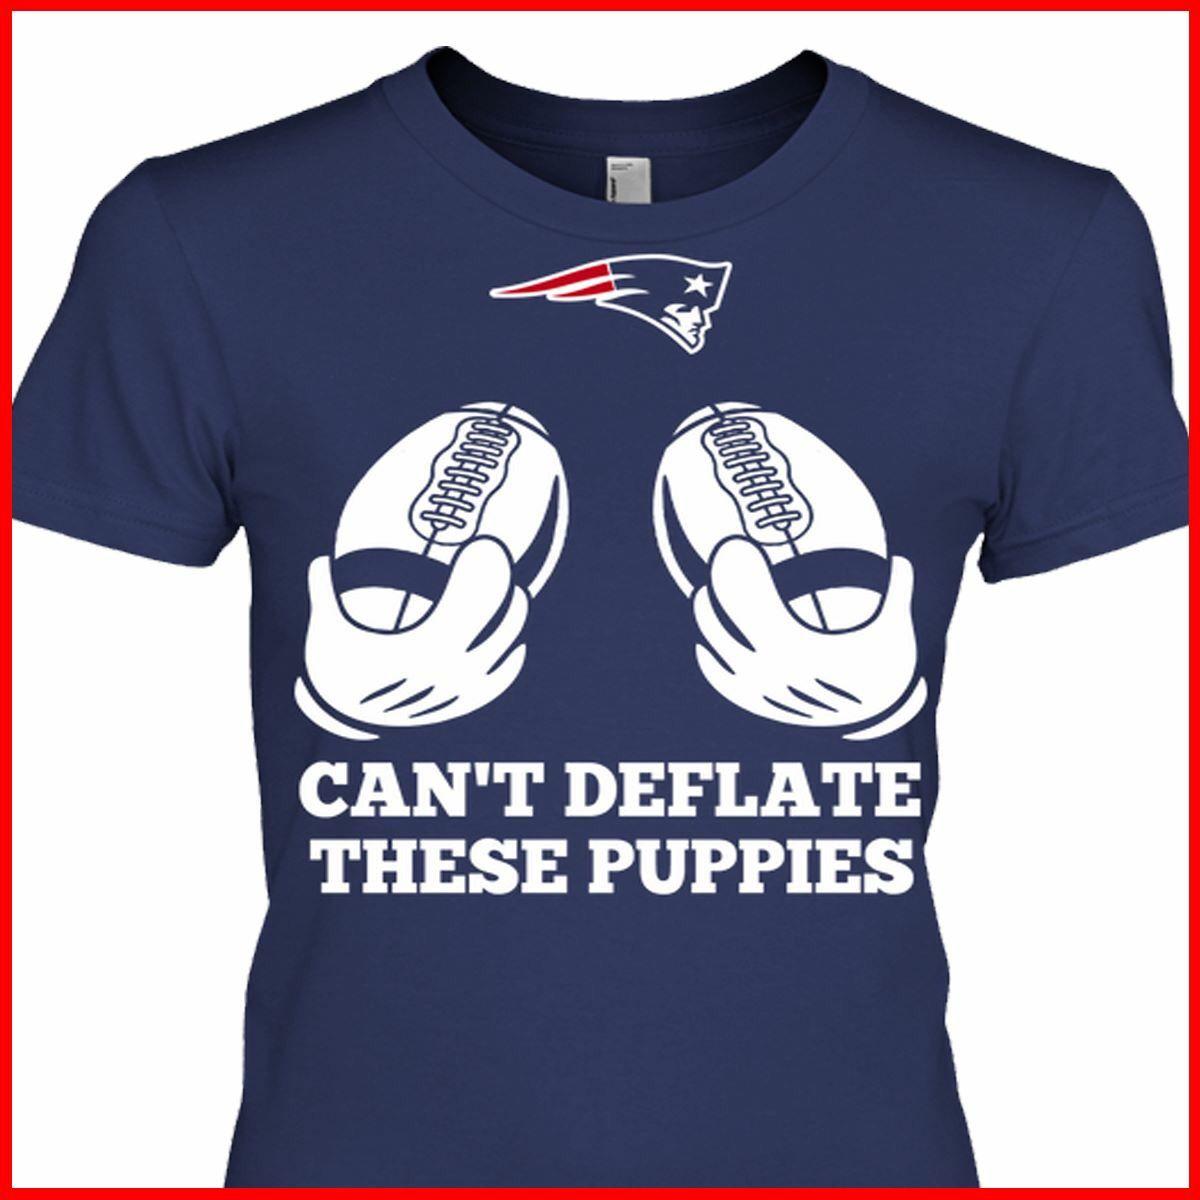 Deflate Logo - Can't deflate these. New England Patriots. Mens tops, Patriots, Tops